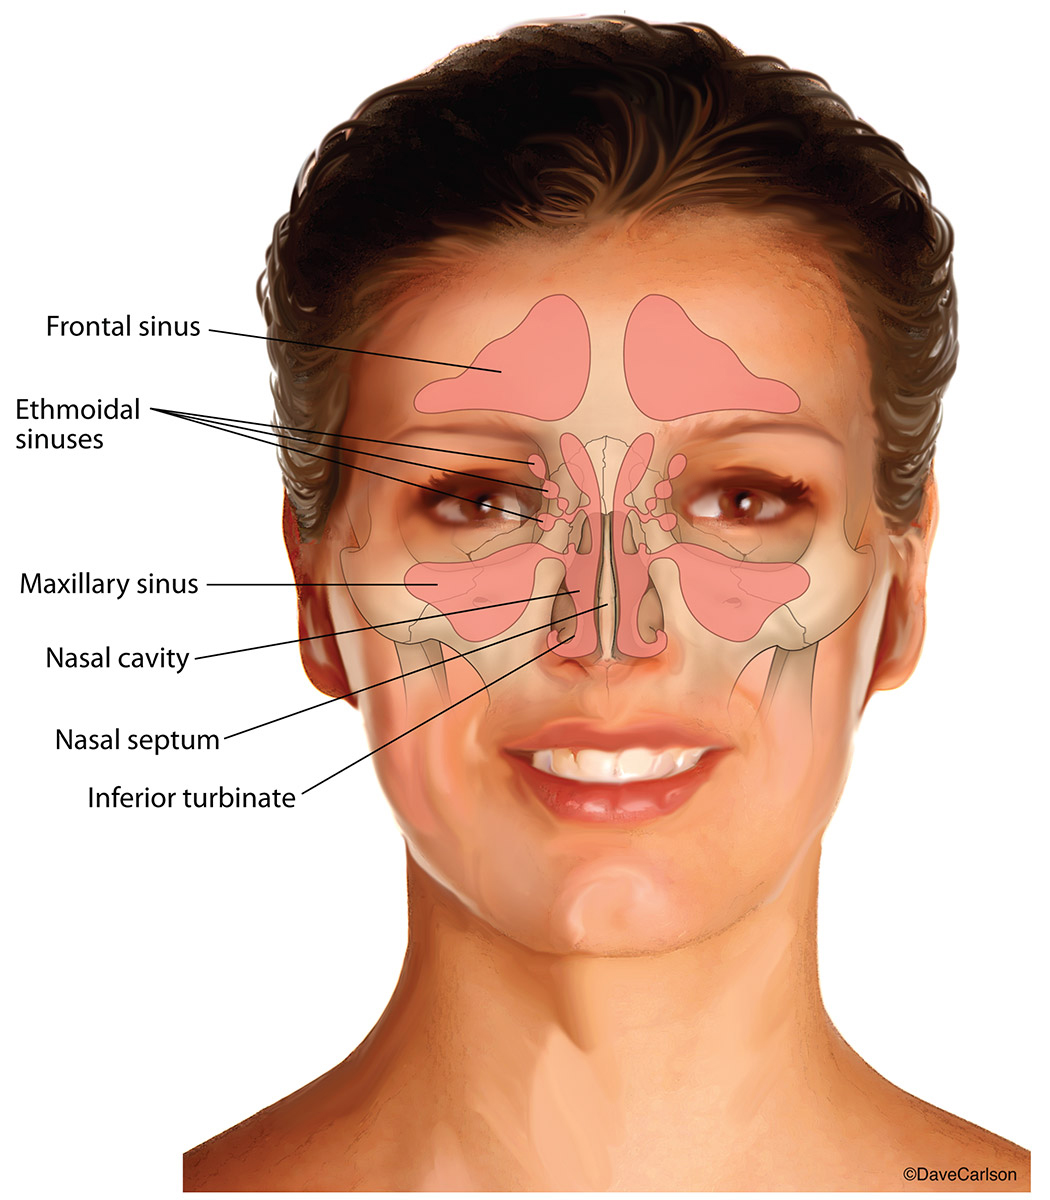 Illustration showing the nasal sinuses located within the front of the skull.